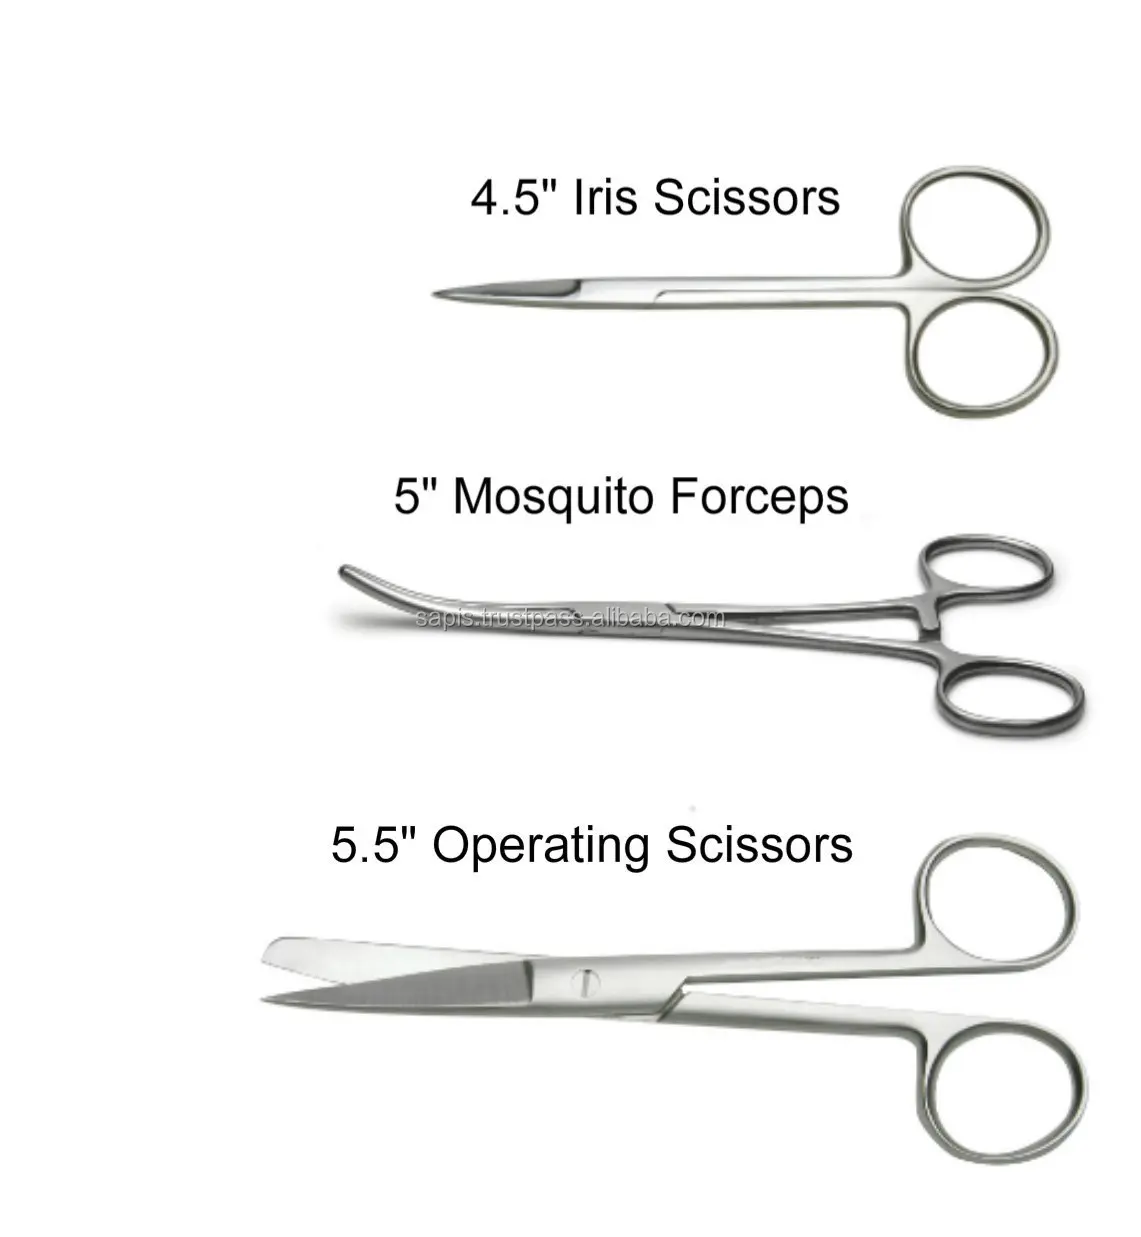 frog dissection tools